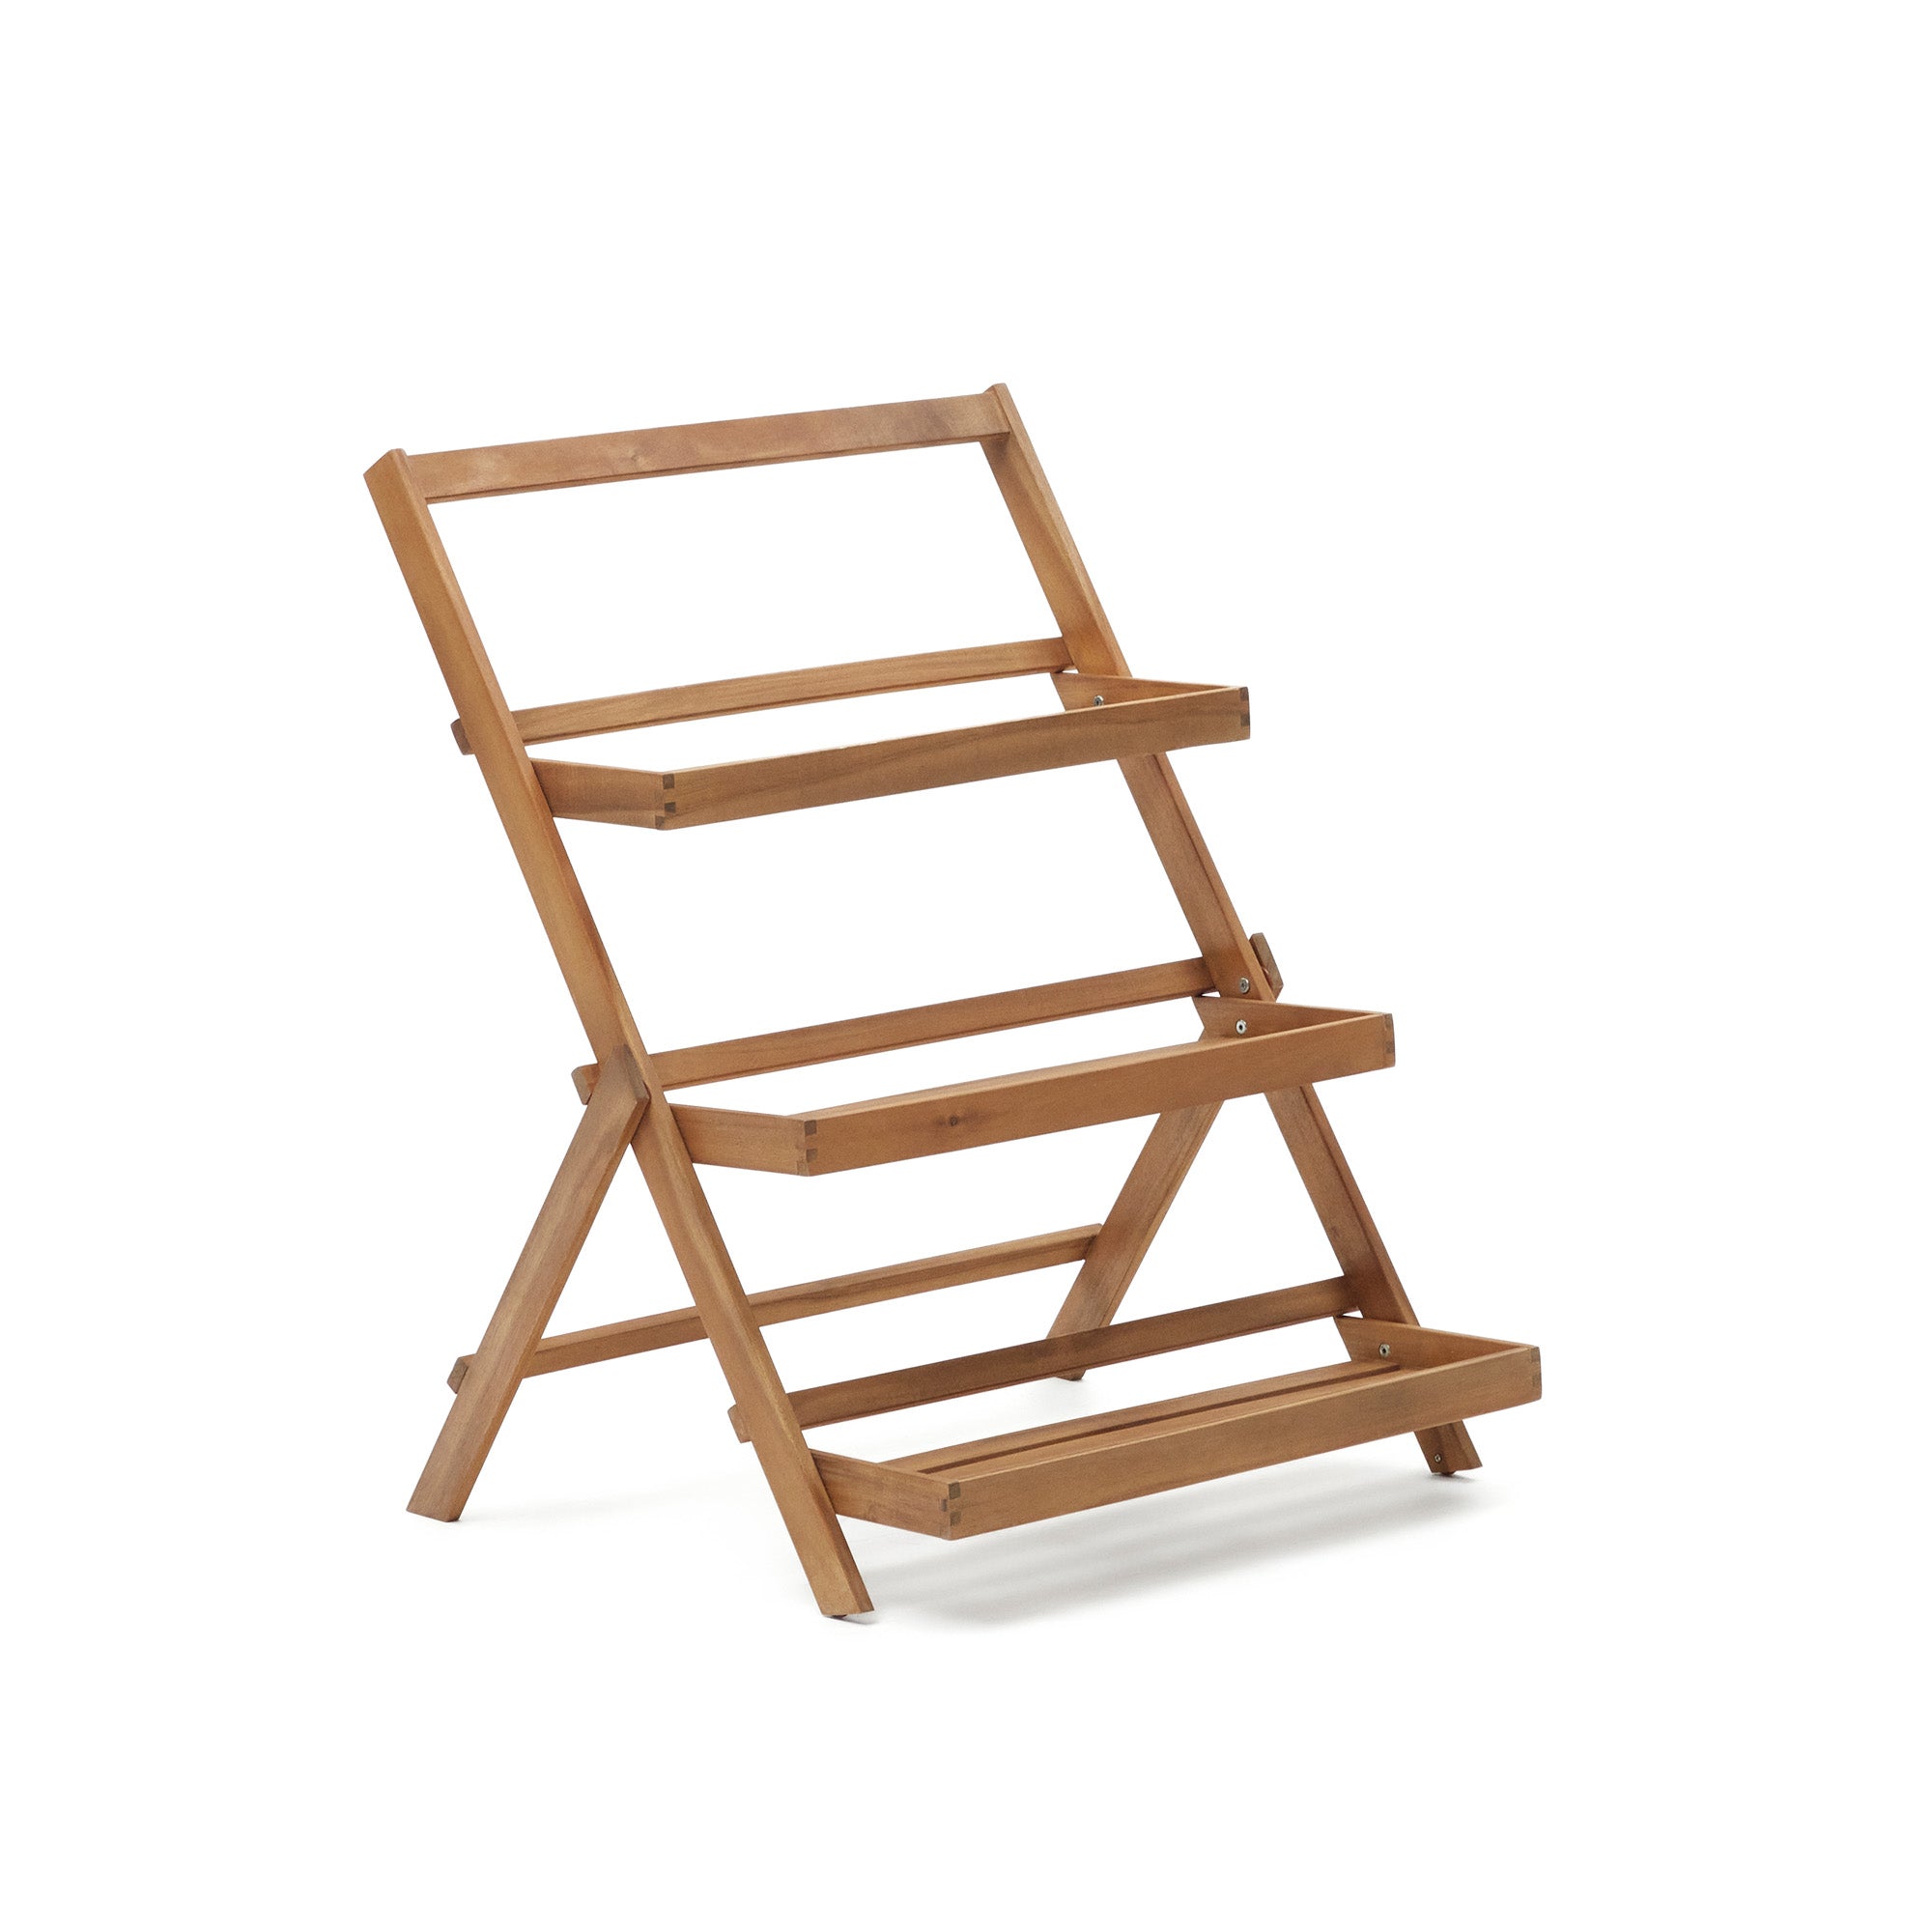 Victora outdoor shelving unit made from solid acacia wood, 70 x 85 cm